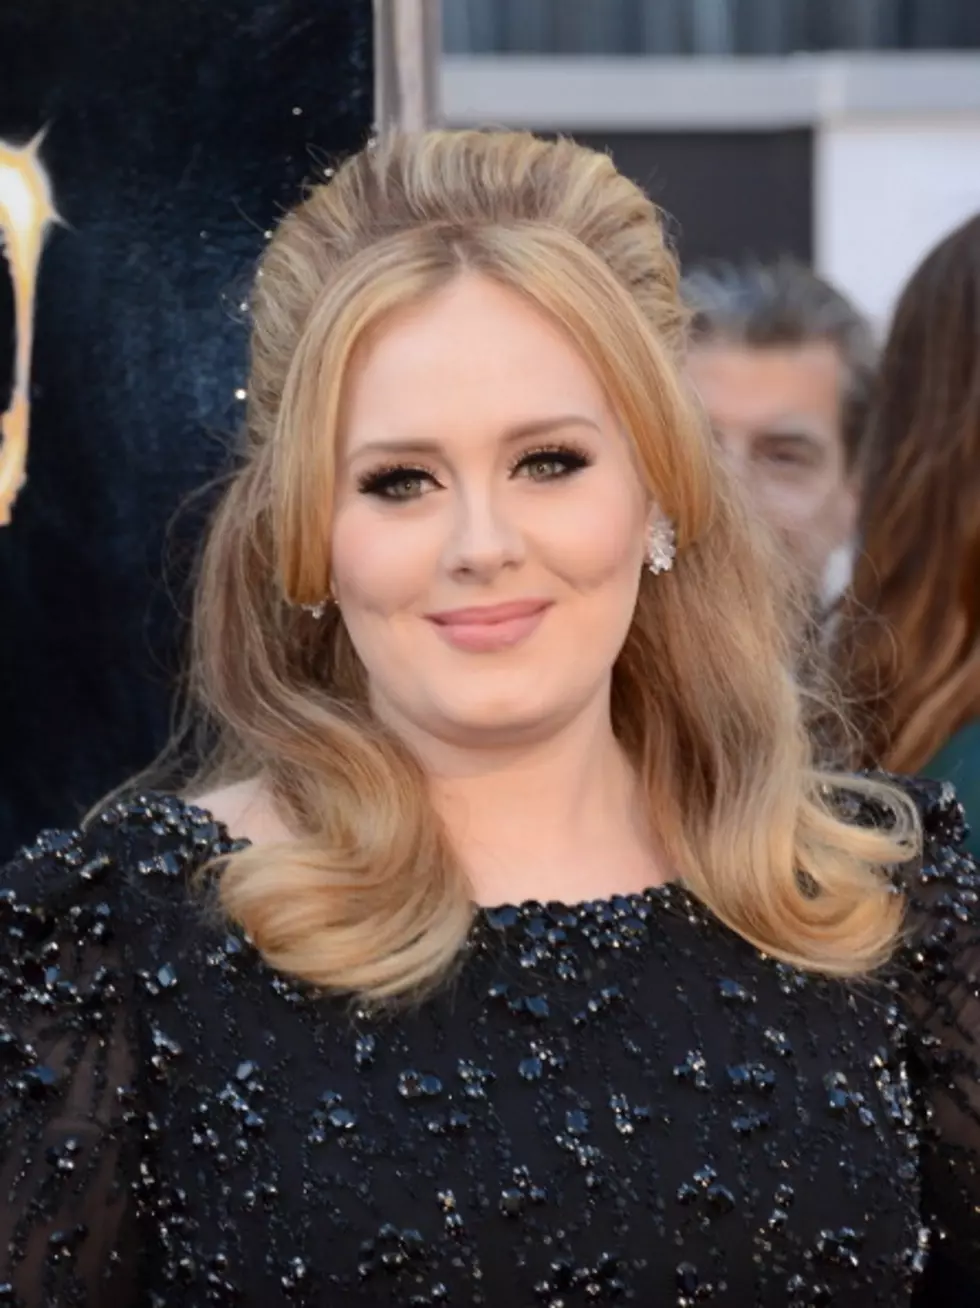 Adele Announces North American Tour! Will it Be Awesome or Boring?